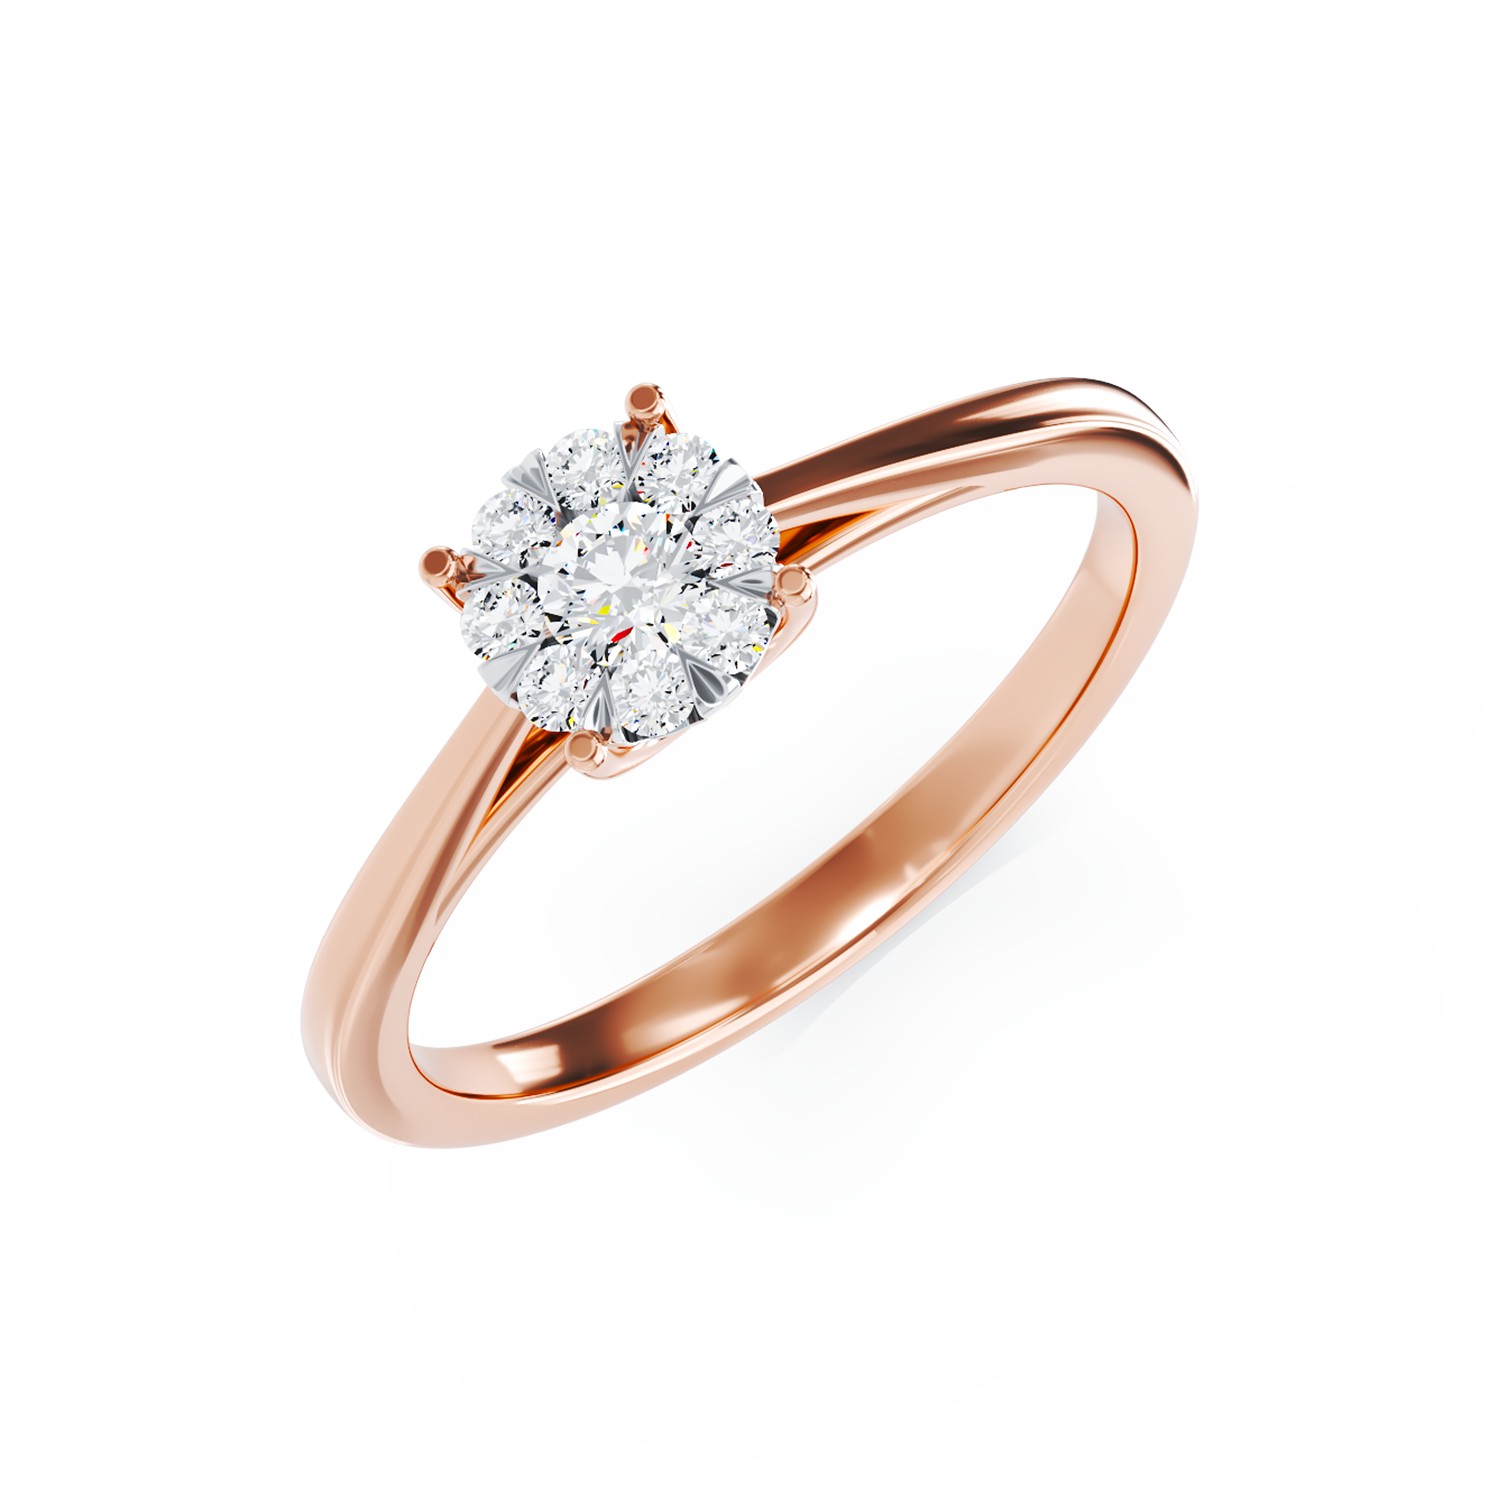 14K rose gold engagement ring with 0.104ct diamonds